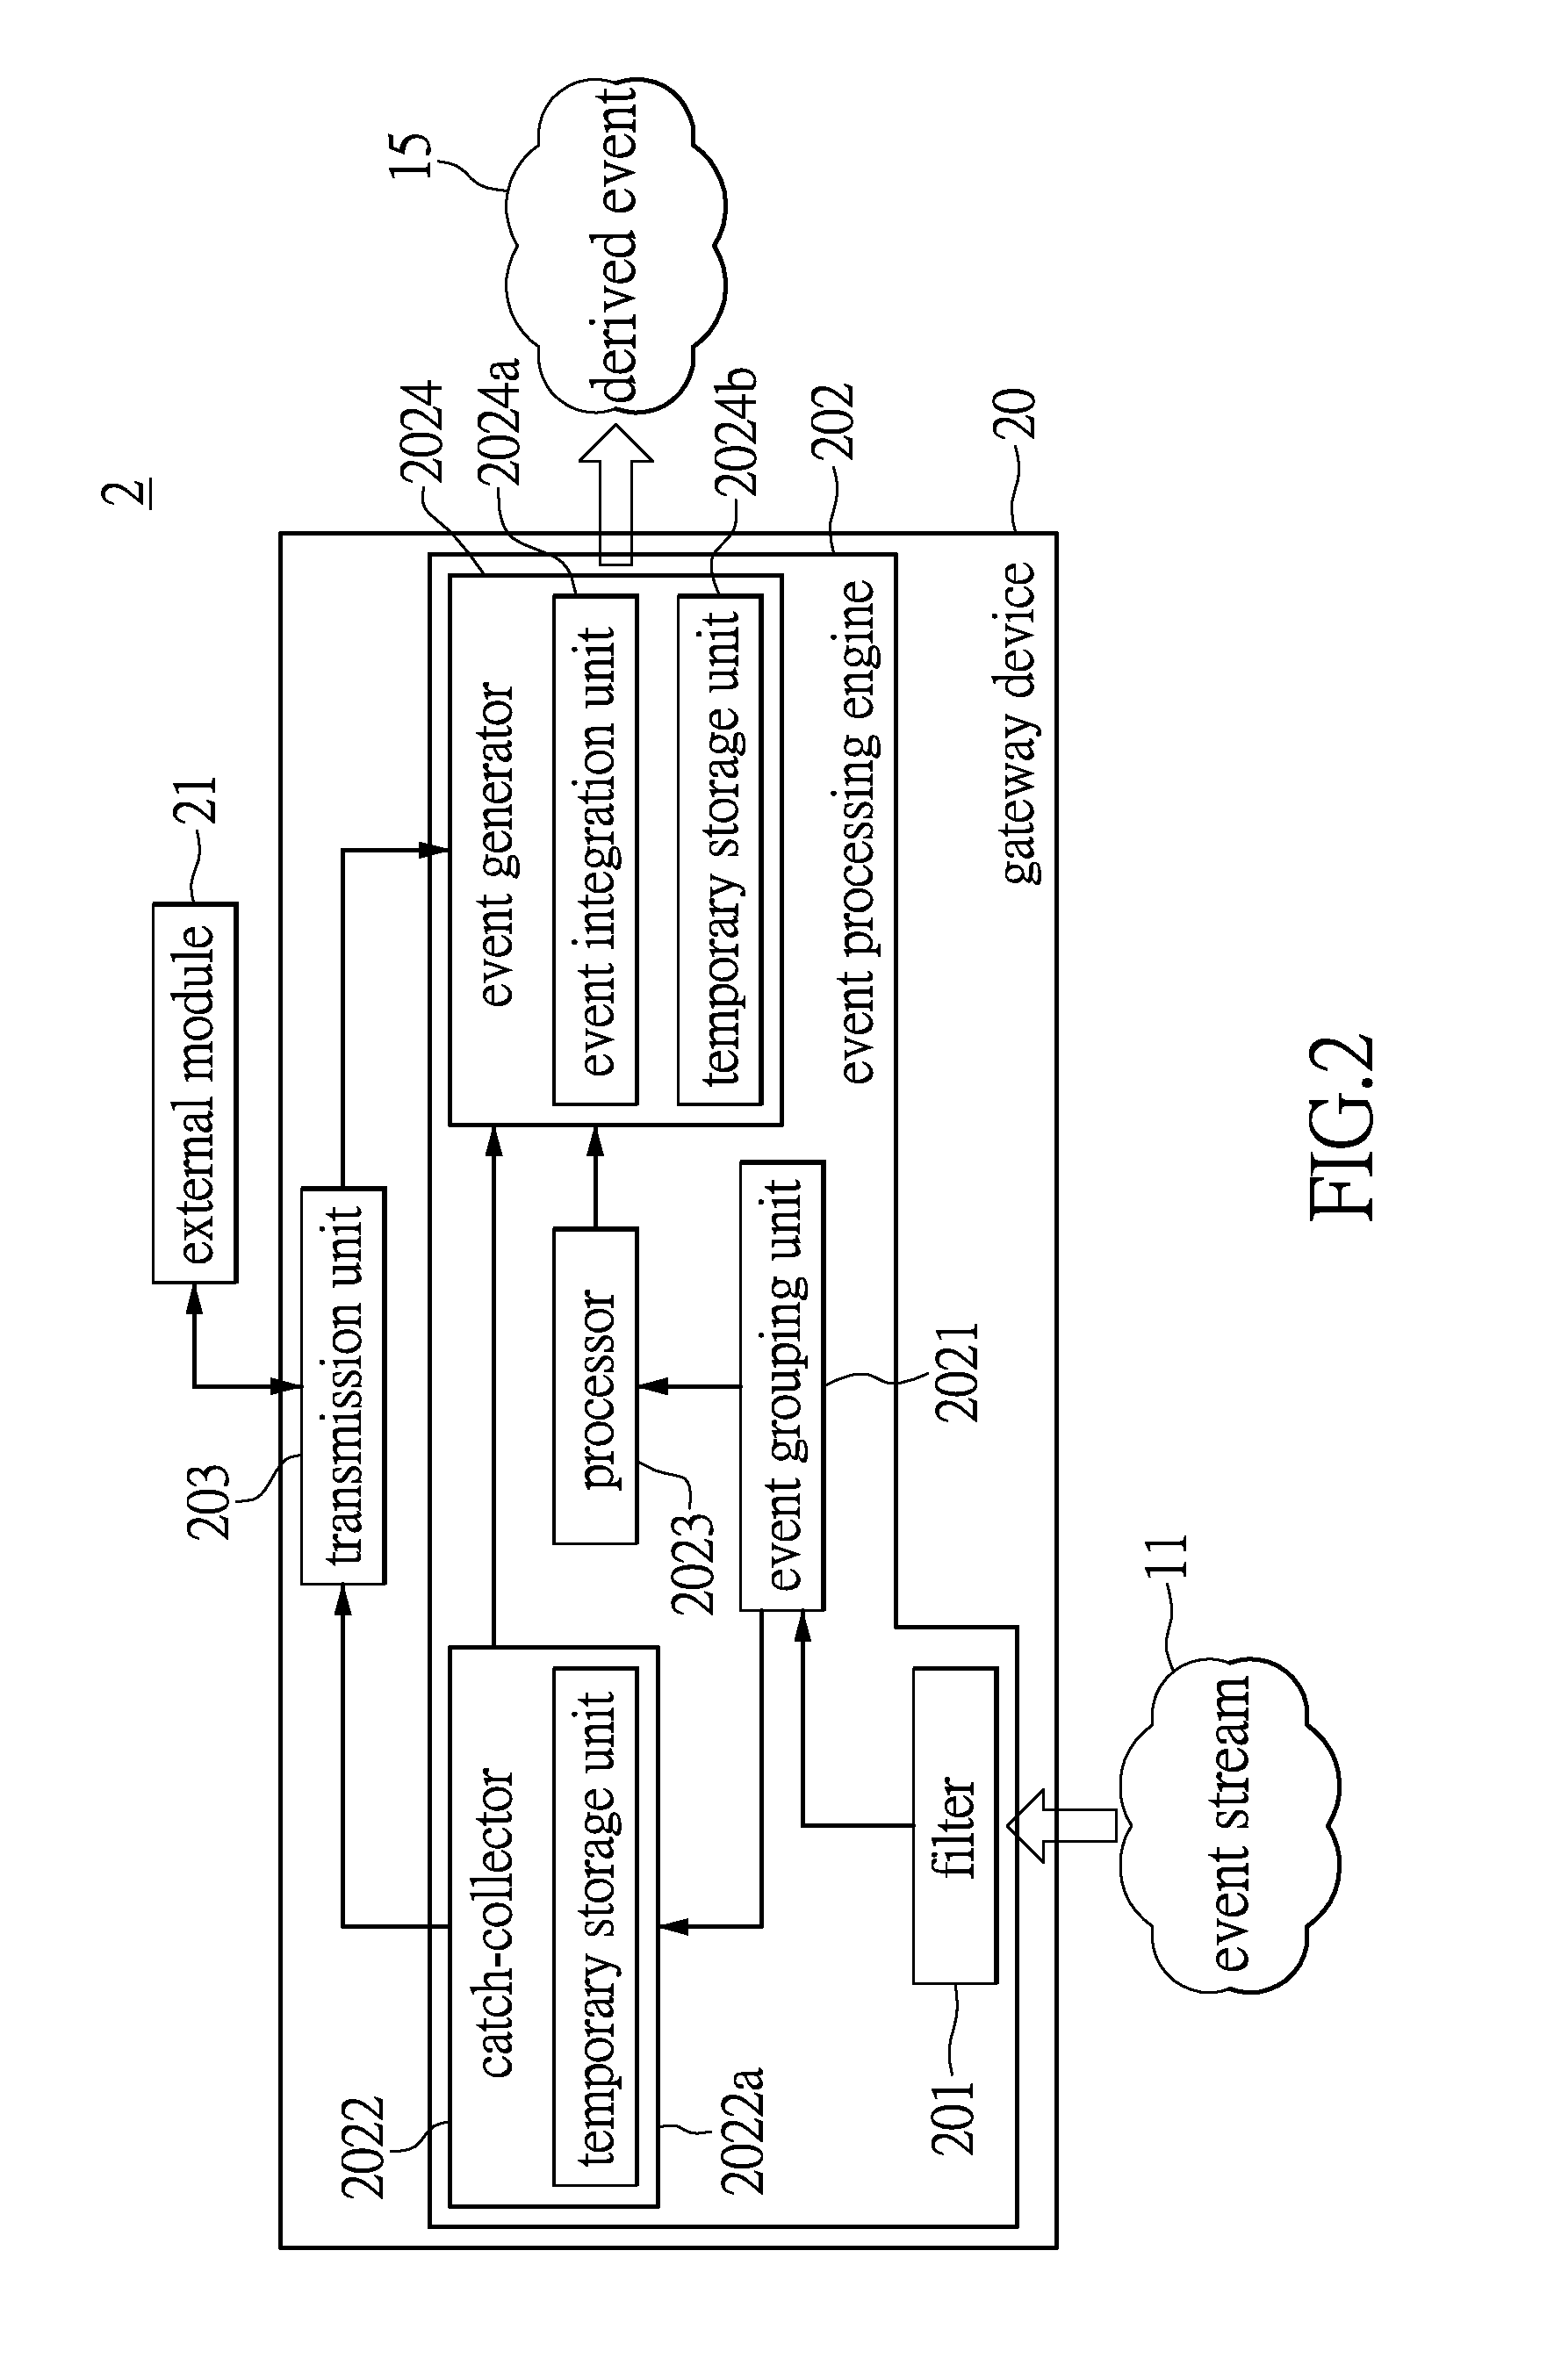 Event stream processing system, method and machine-readable storage